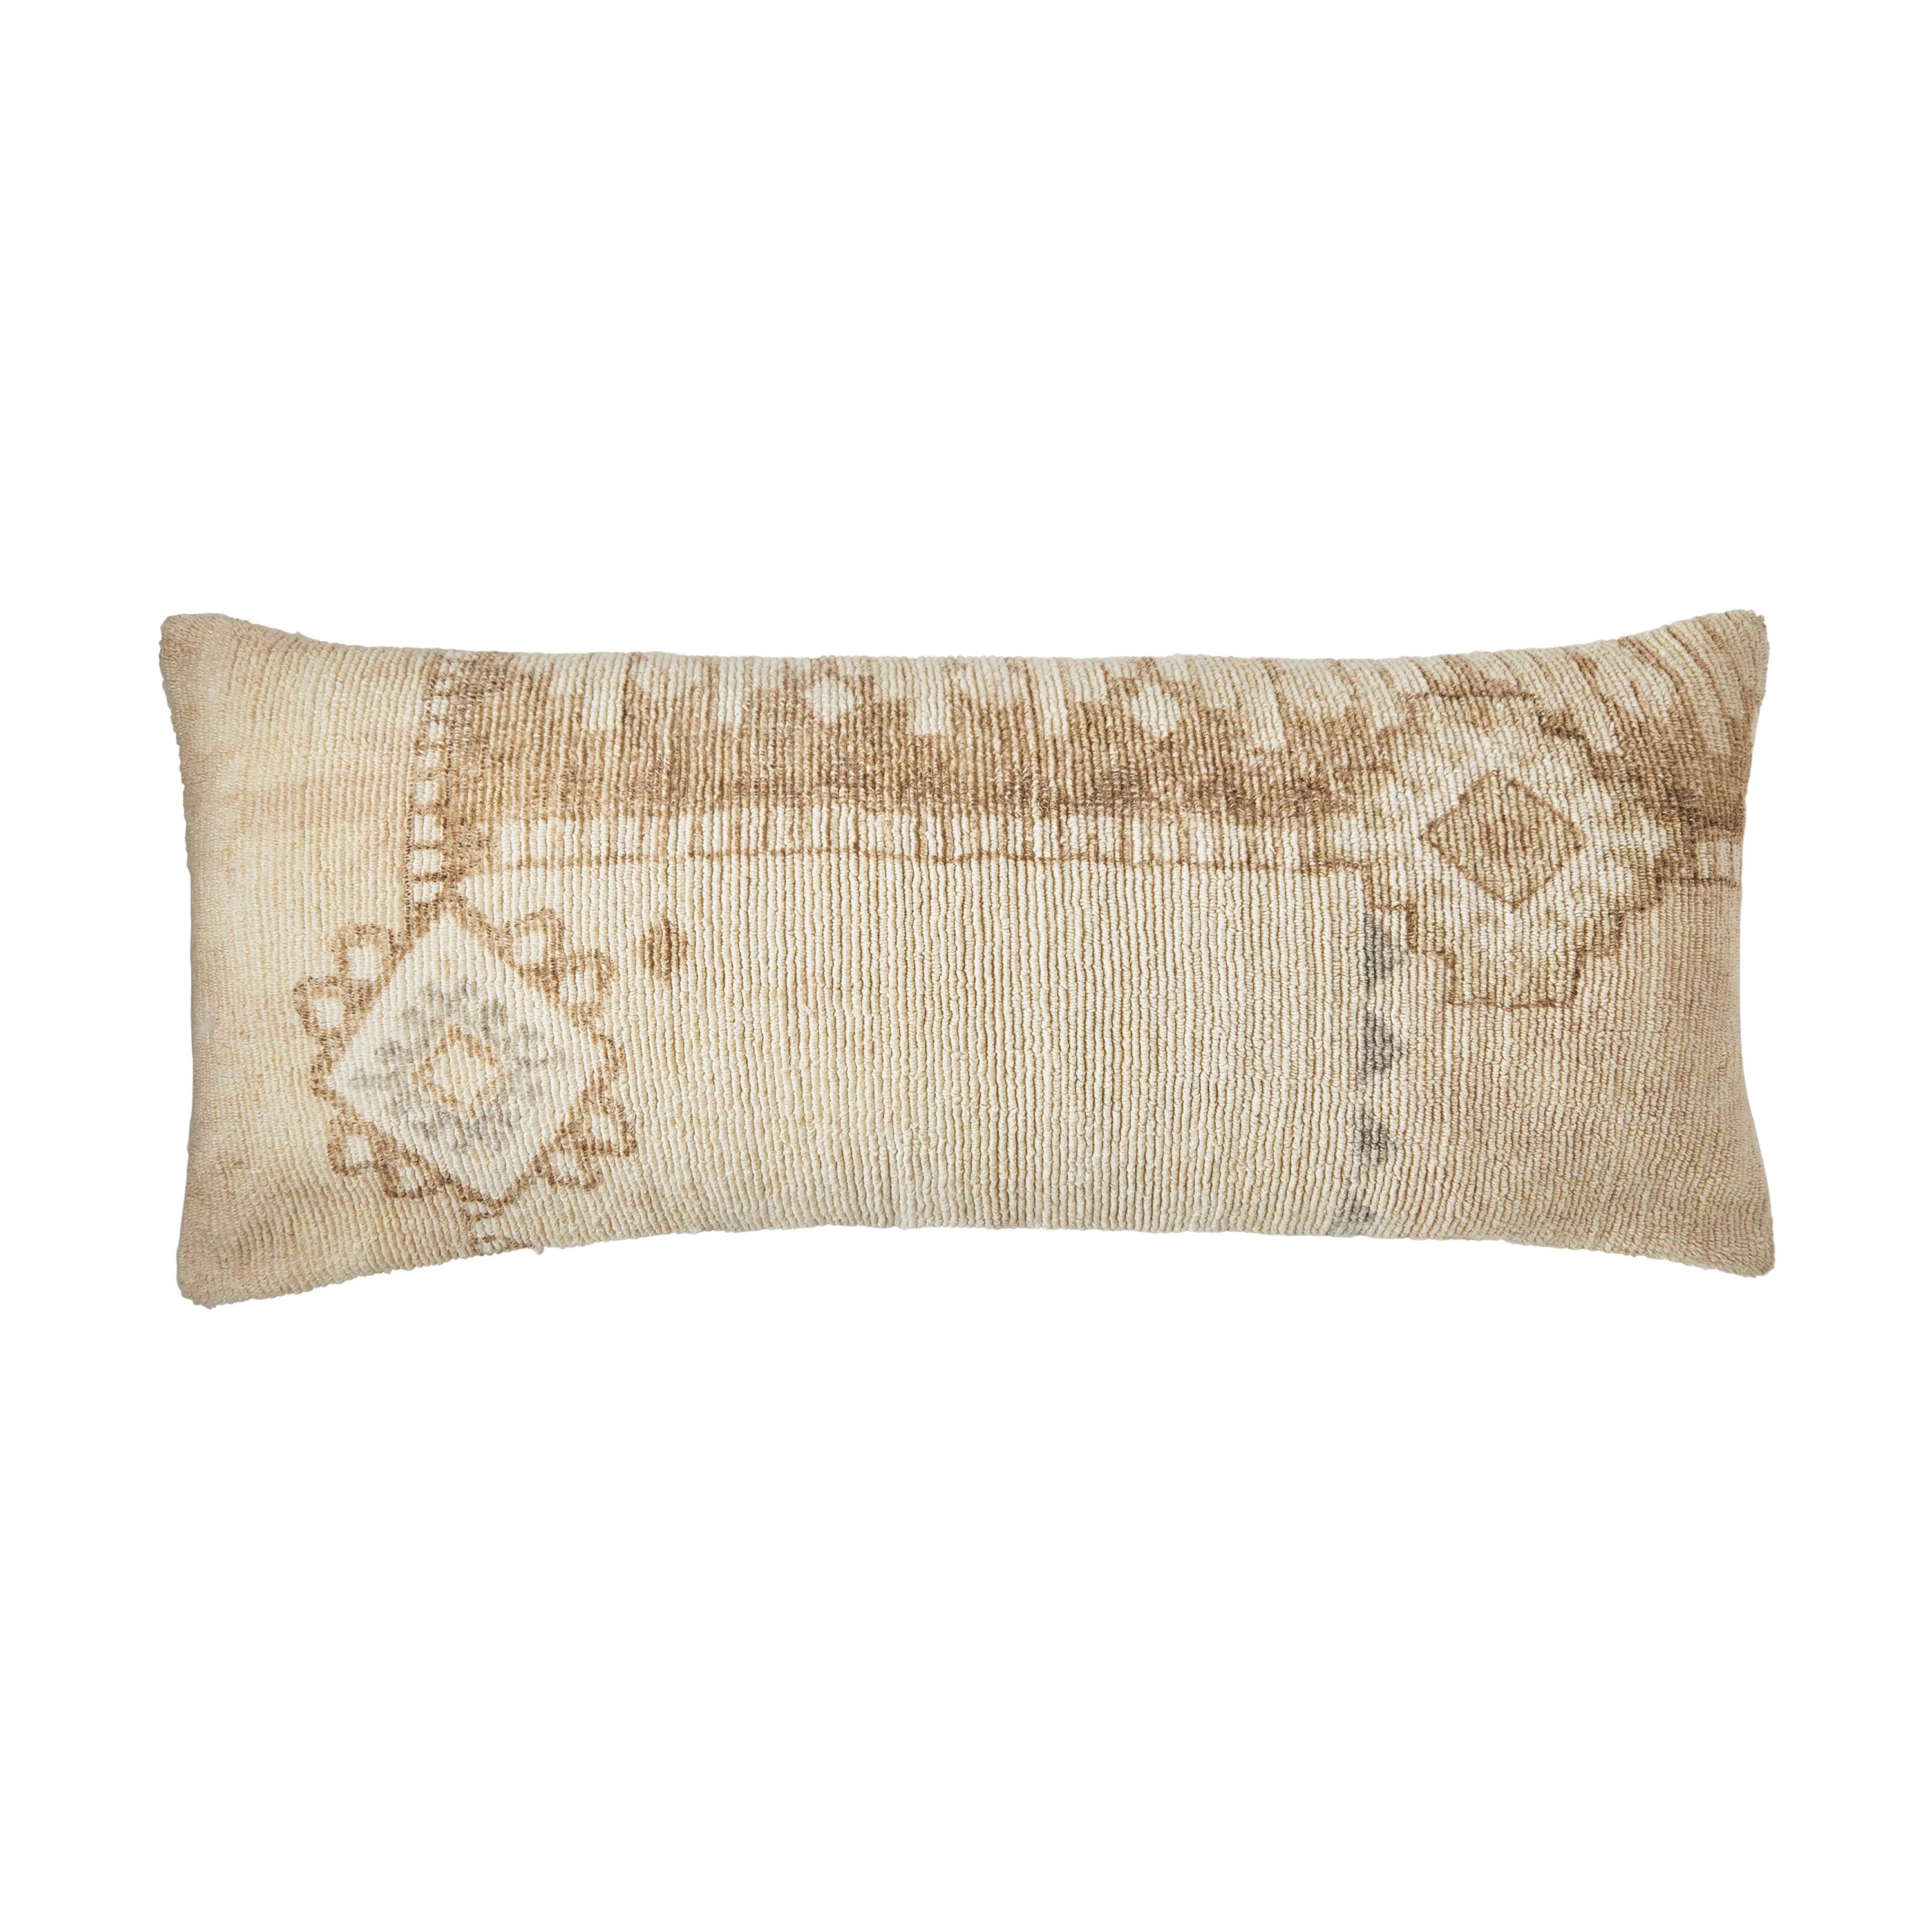 Better Homes & Gardens Beige Persian Patchwork 14" x 36" Pillow by Dave & Jenny Marrs | Walmart (US)